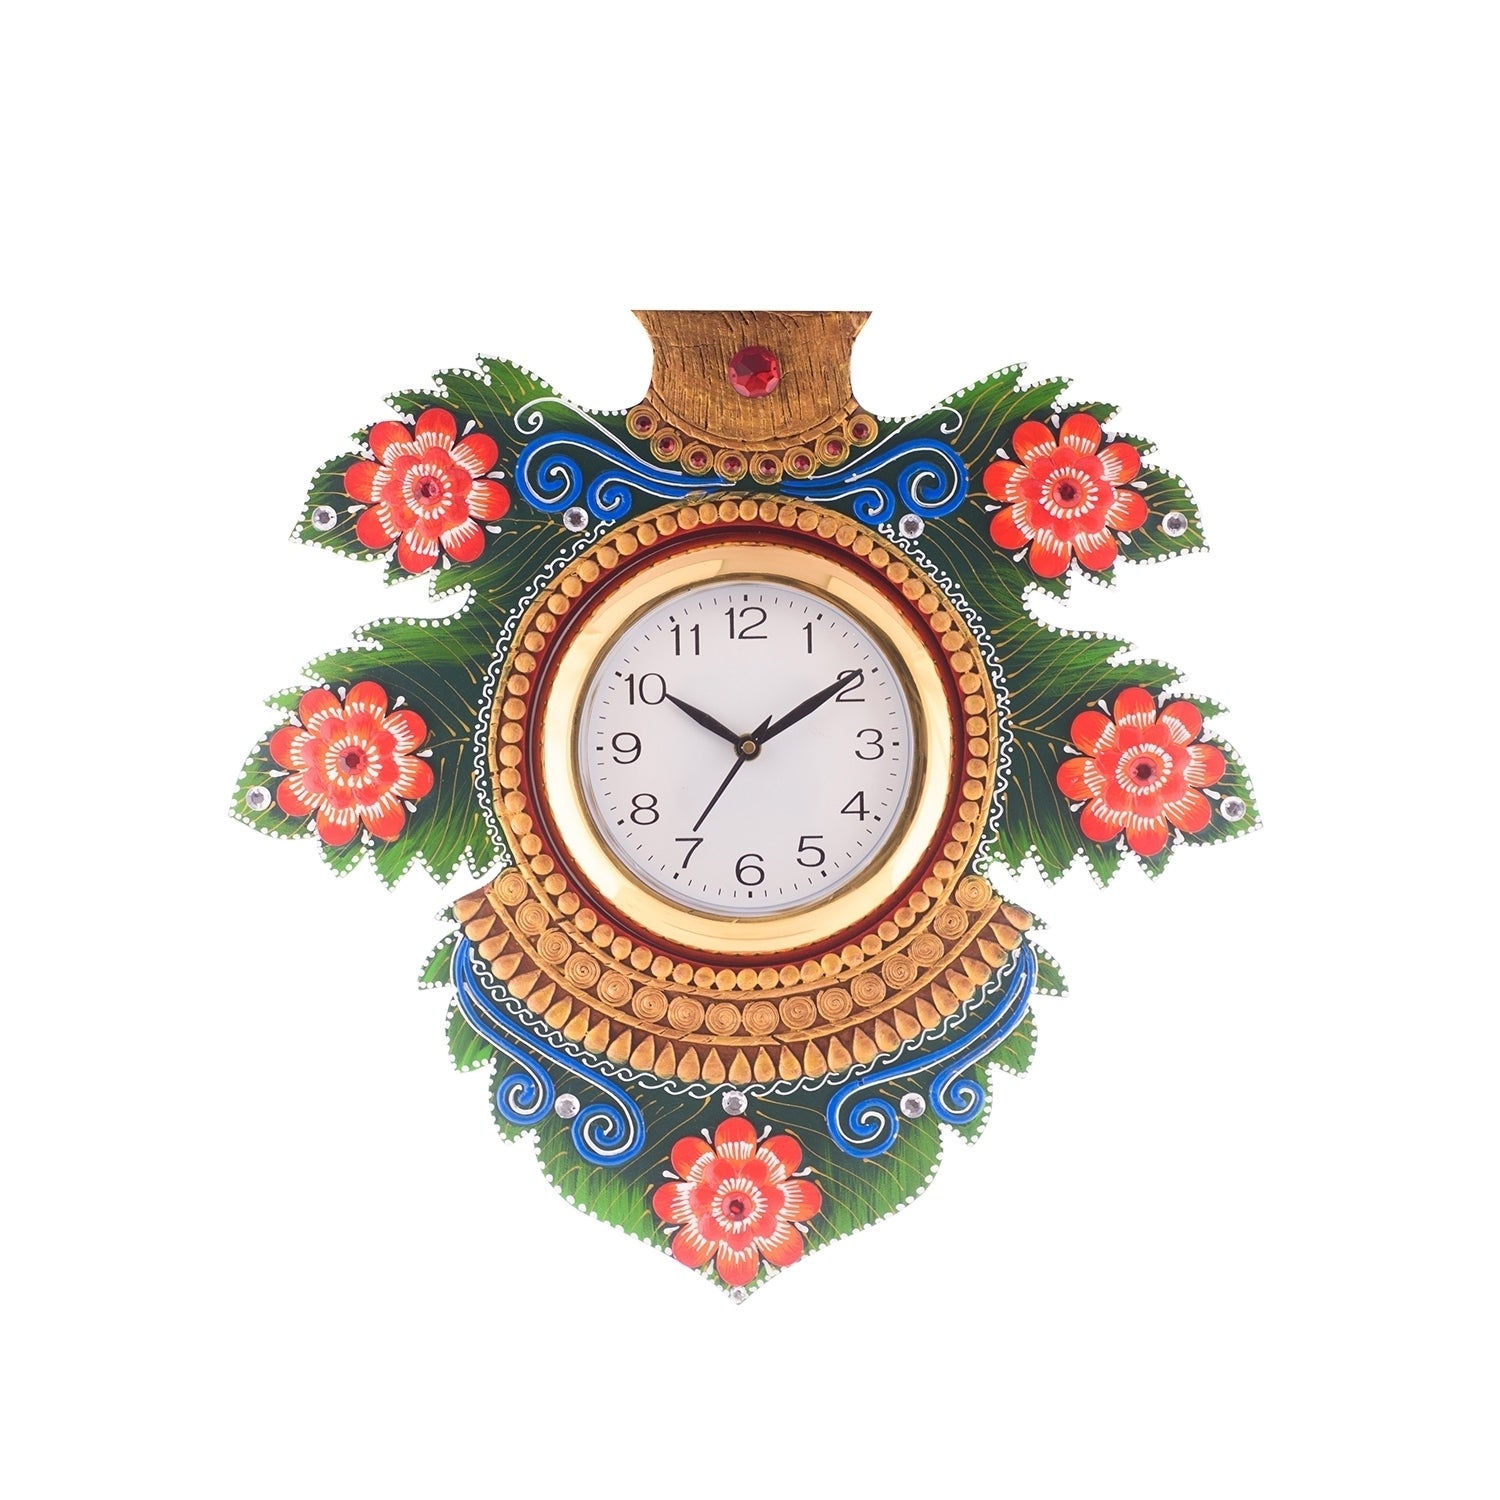 Floral Lead Shape Wooden Handcrafted Wooden Wall Clock (H - 15.5 Inch)